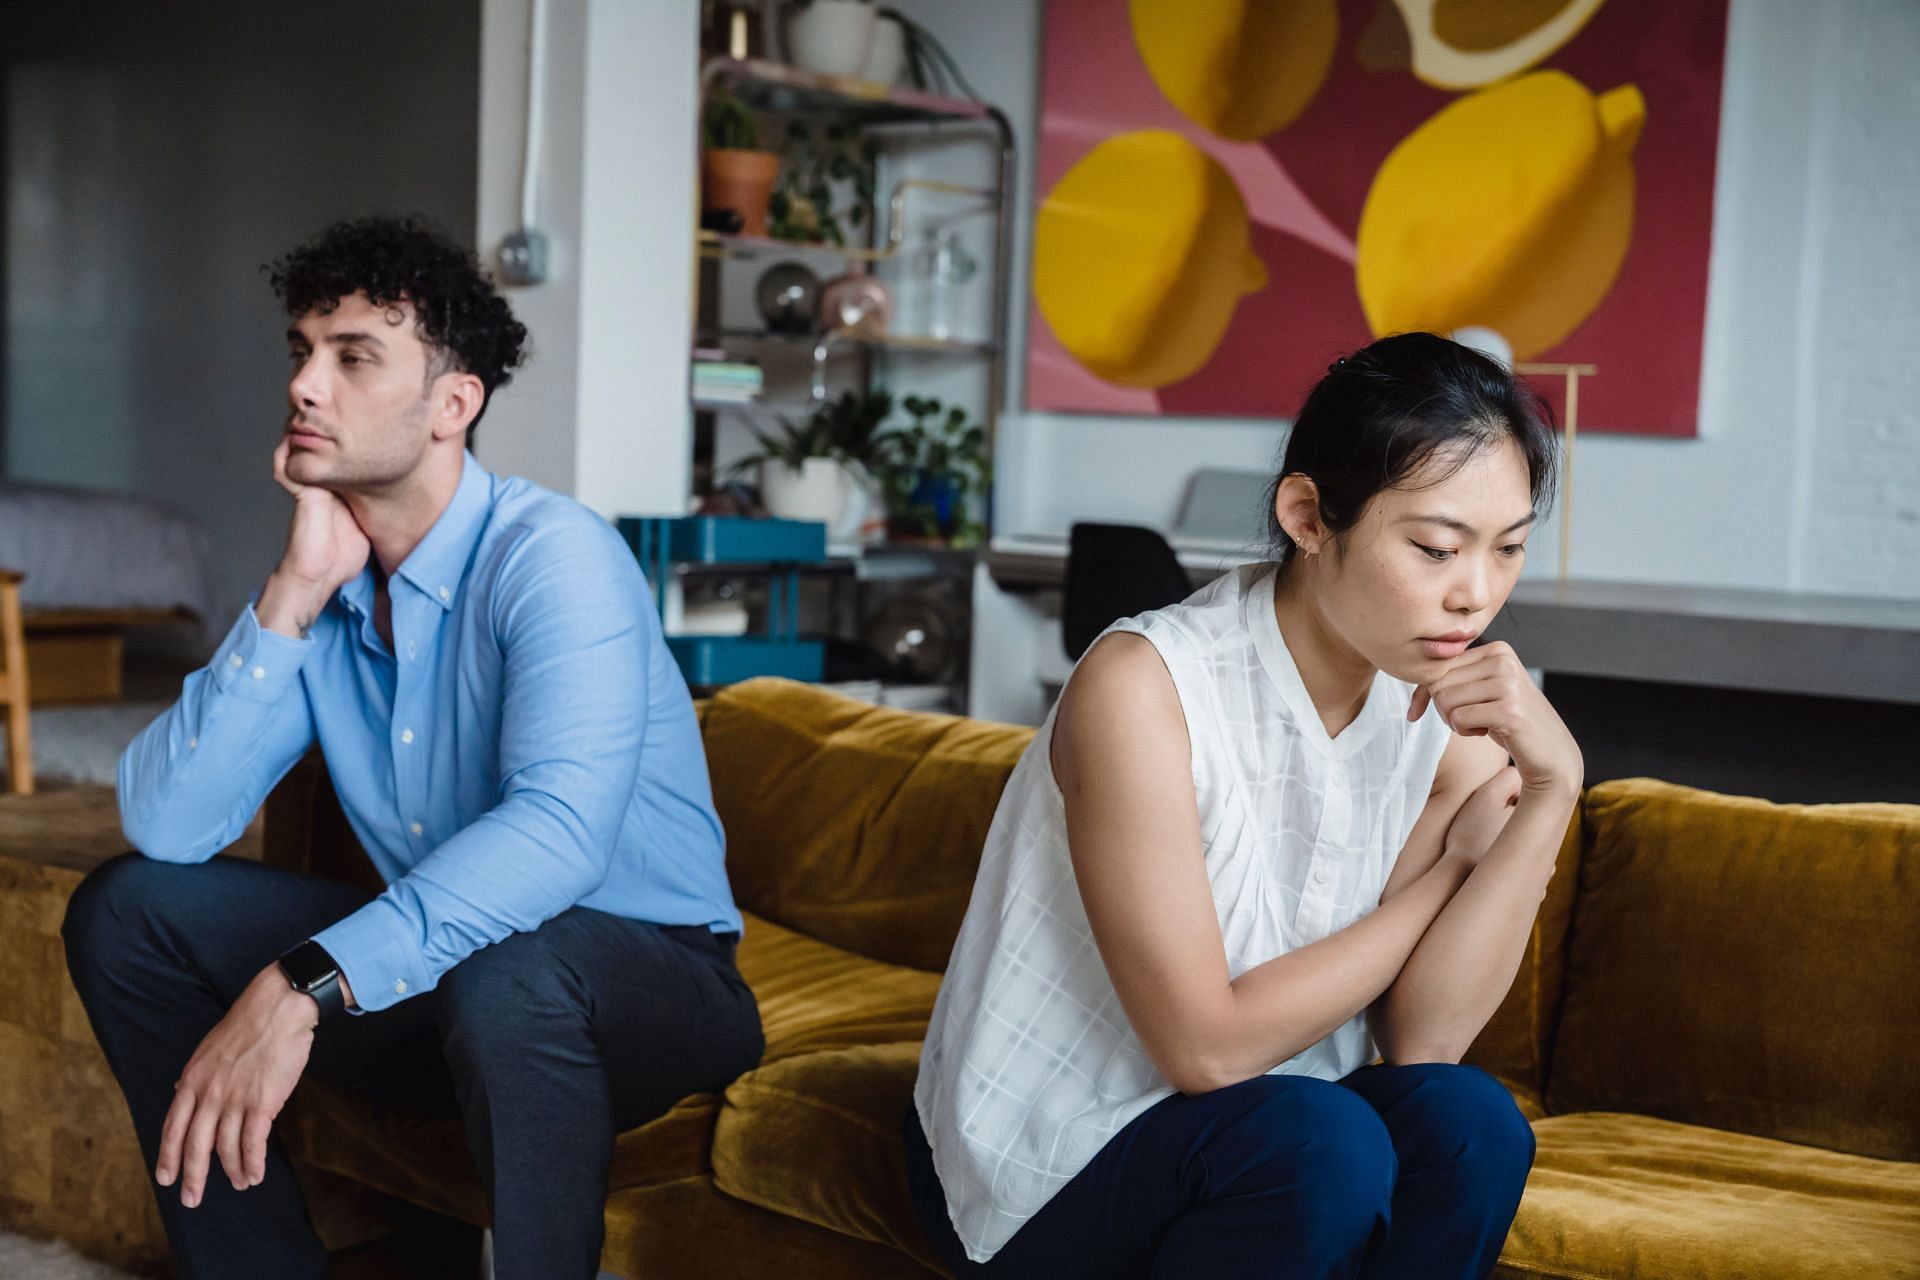 Attachment styles are not the same for everyone.  (Photo credit: Pexels/Timur Weber)